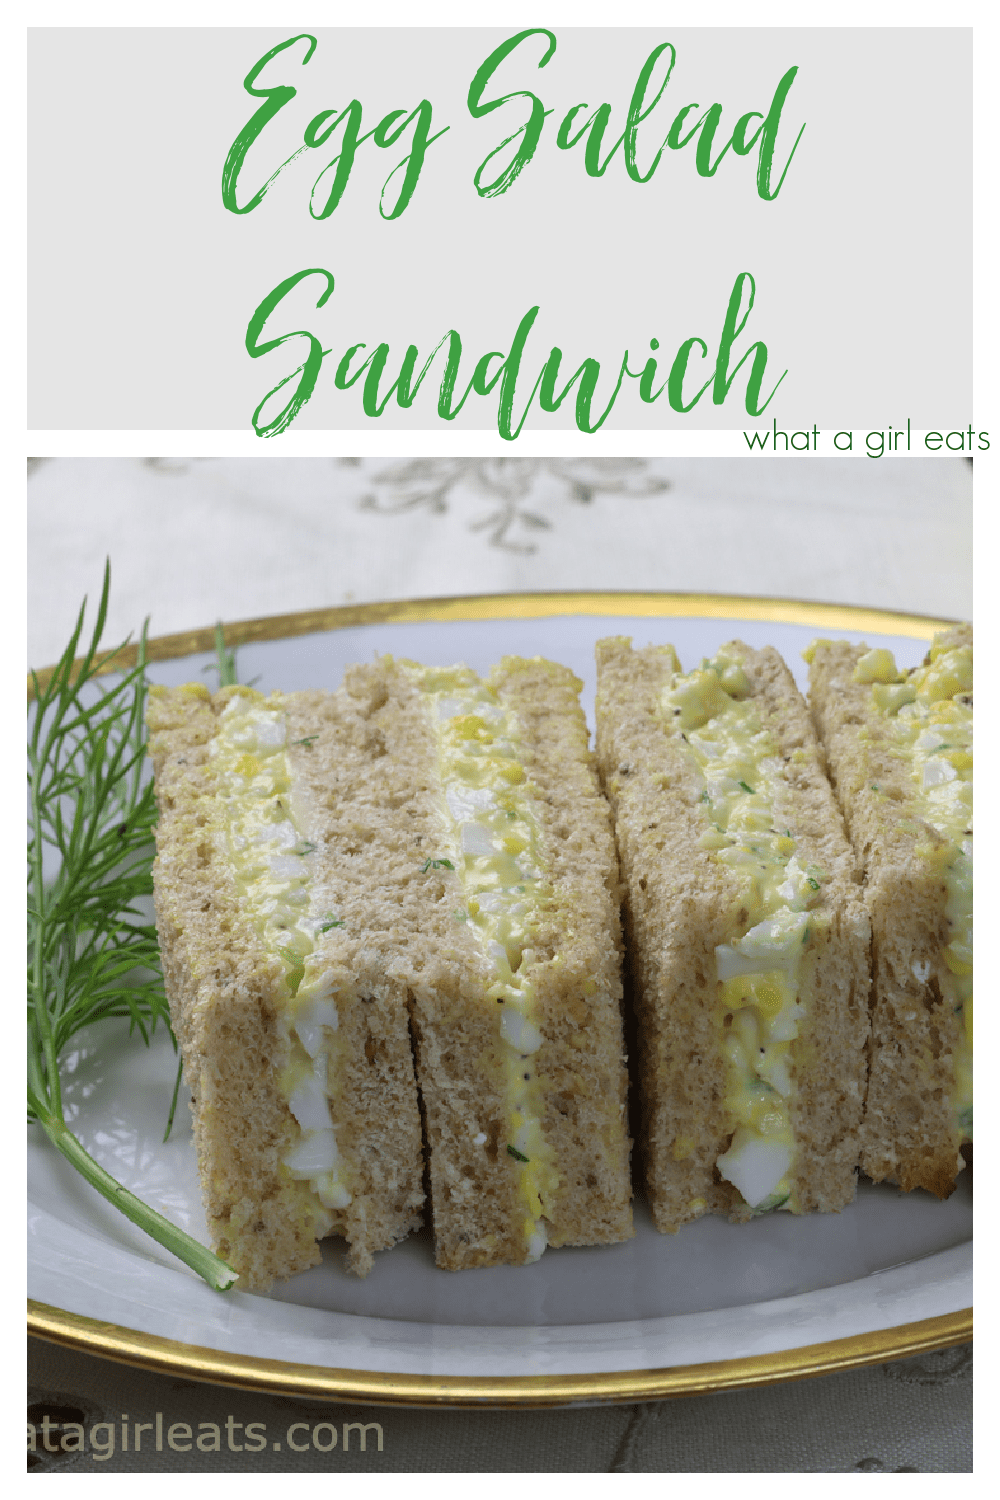 Who doesn't love a classic egg salad sandwich? It's rich and creamy, and oh, so delicious. Egg salad makes a great tea sandwich!